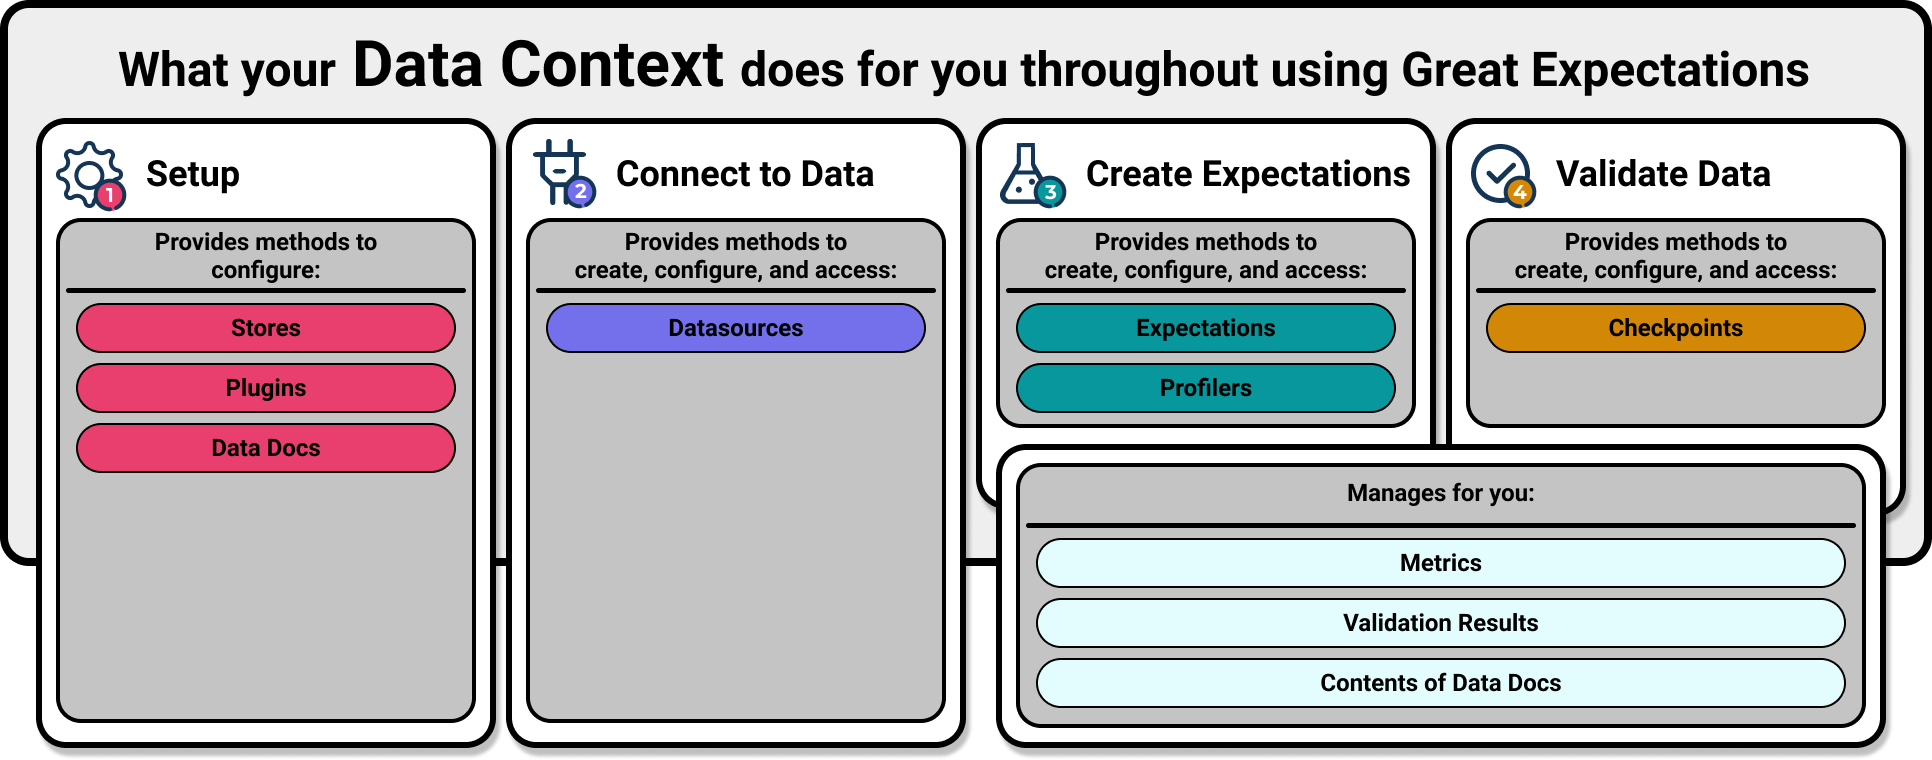 What your Data Context does for you throughout using GX